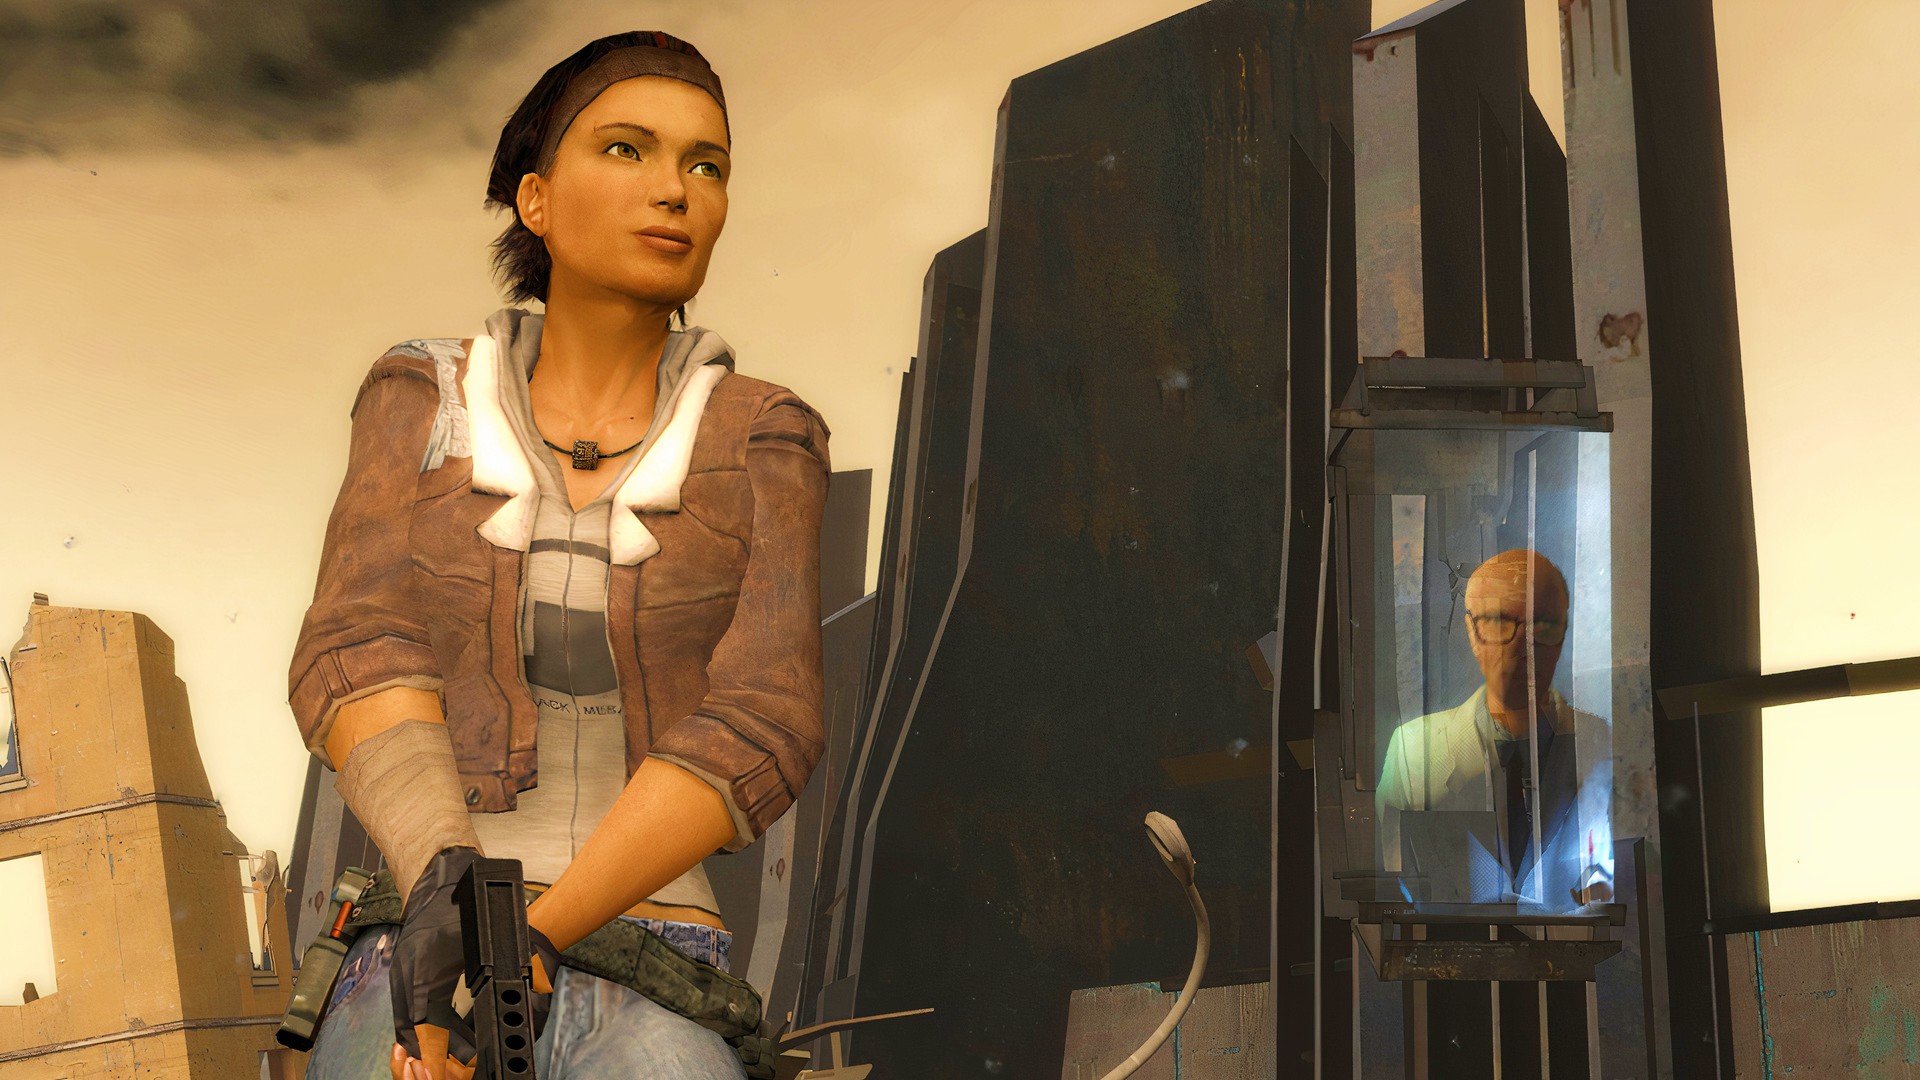 Headset-free Alyx mod turns it into a more traditional Half-Life shooter